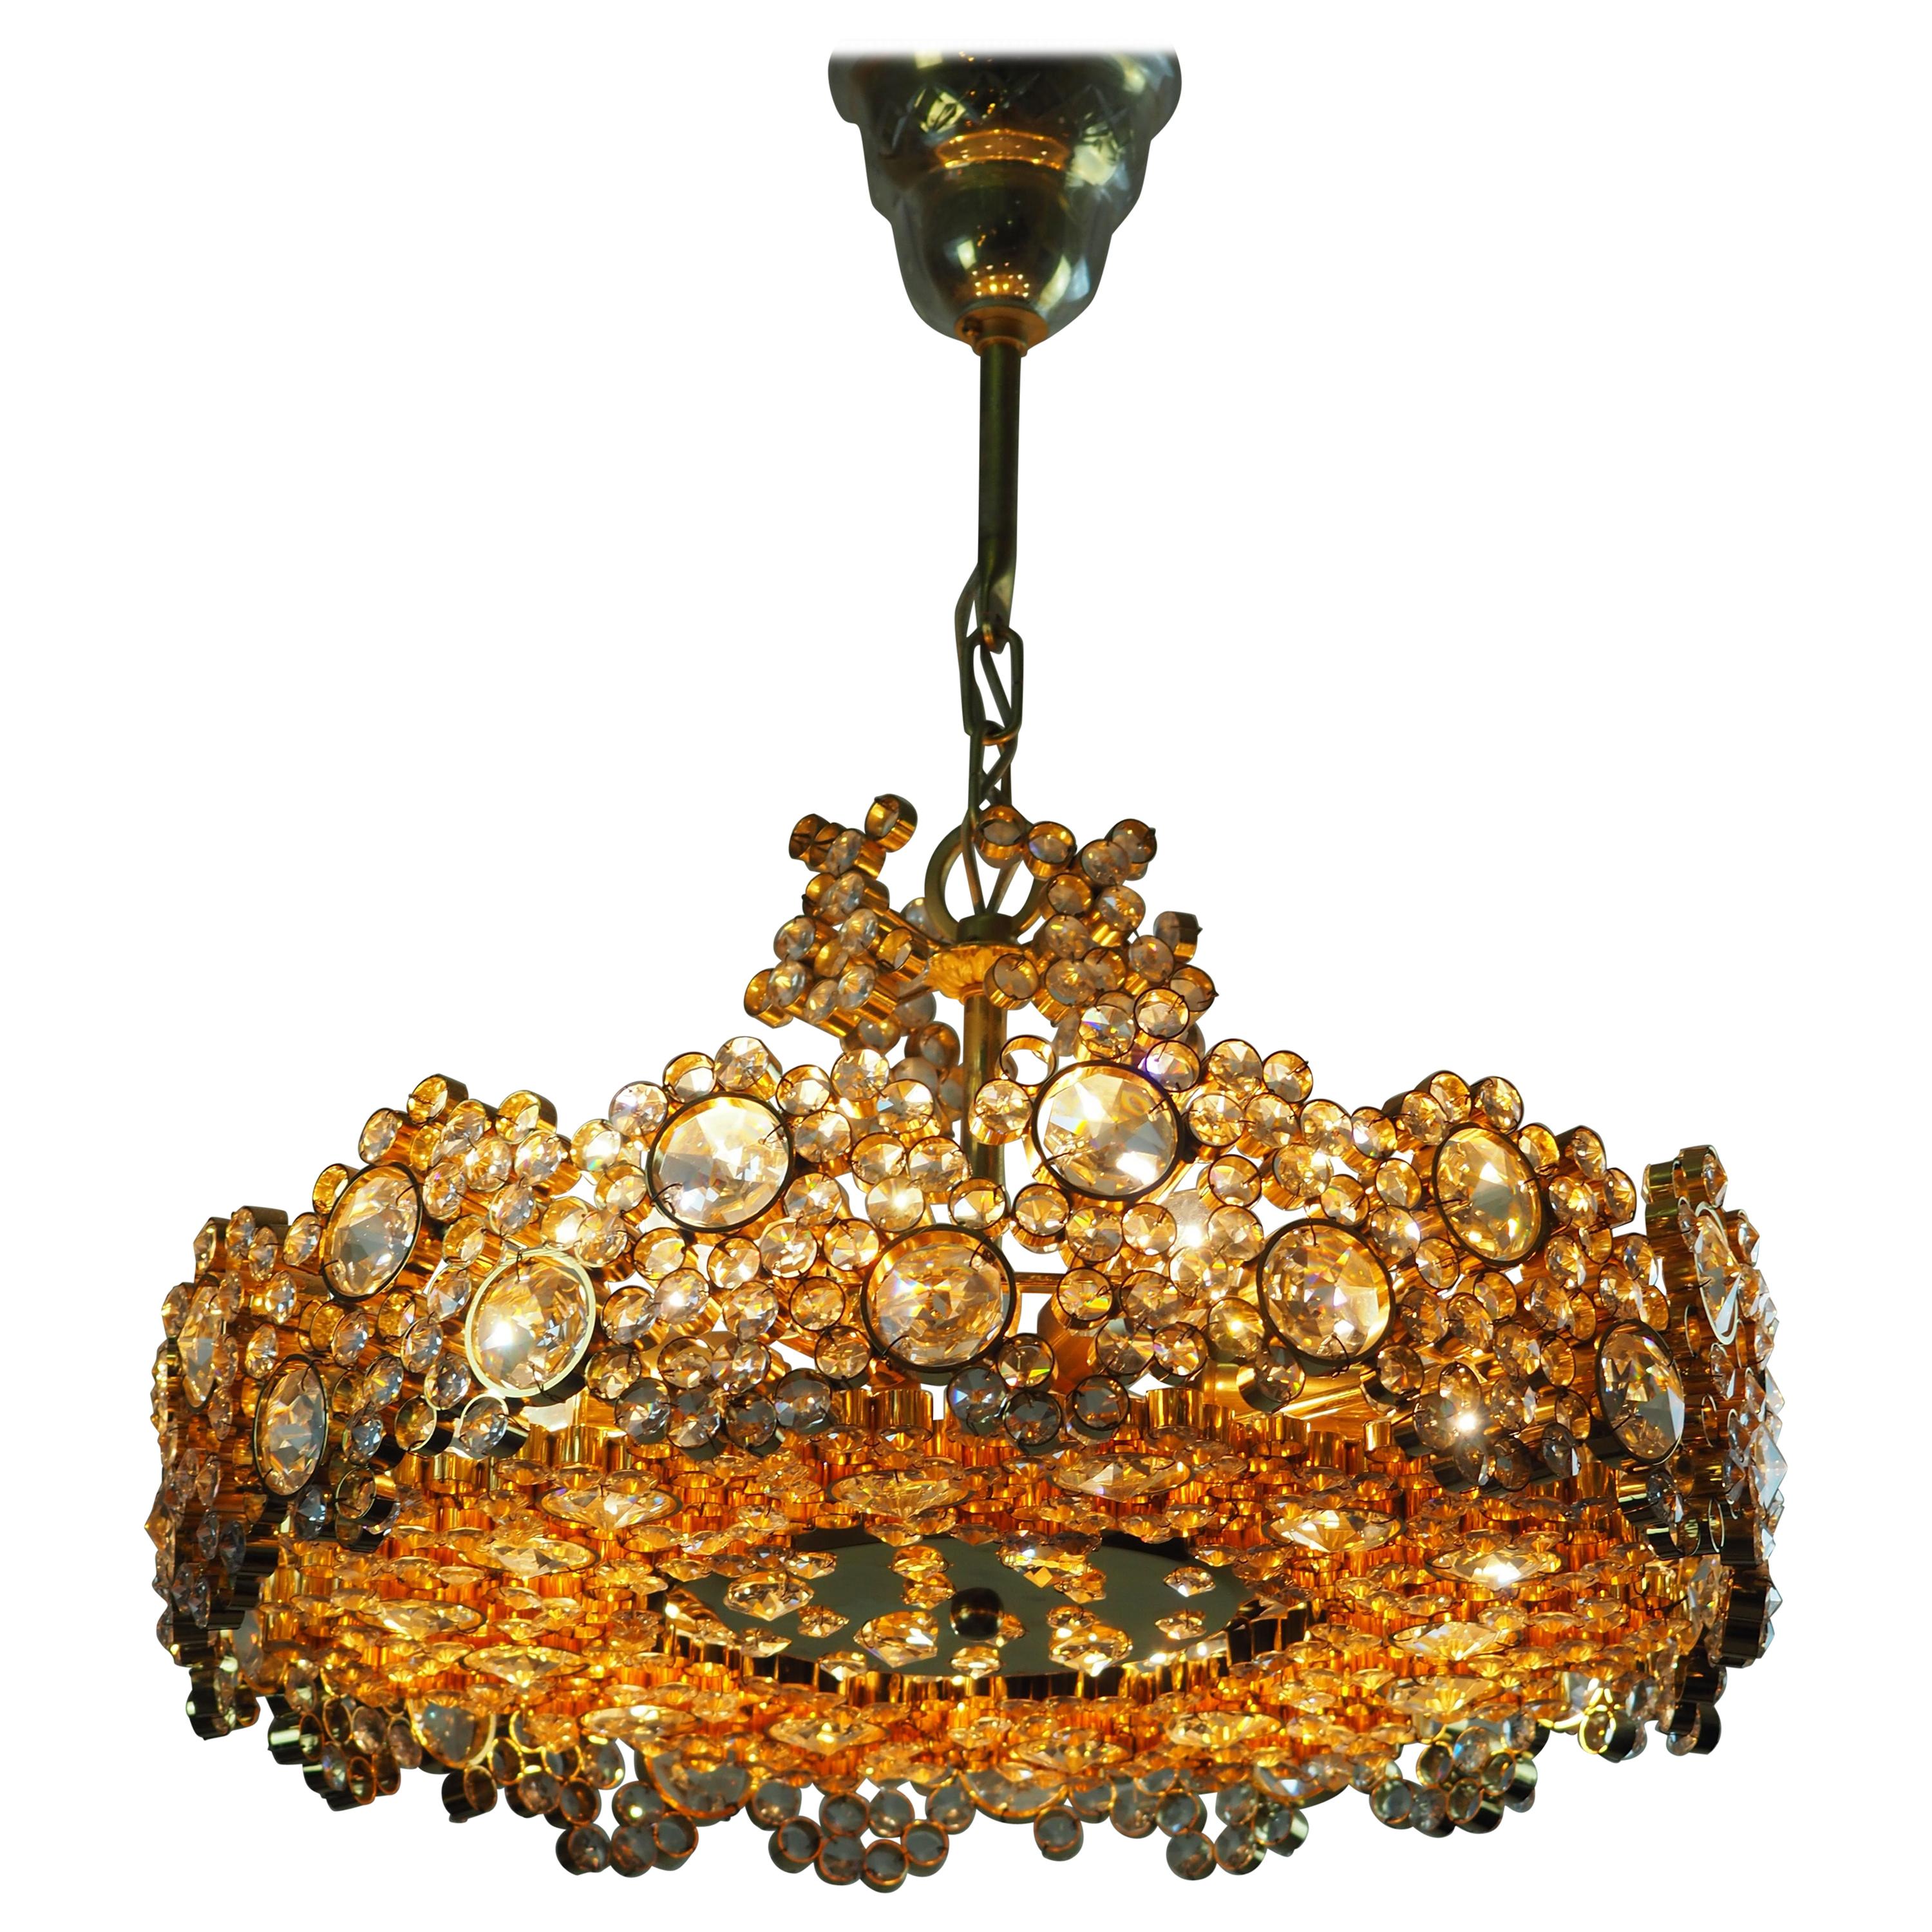 Lovely Gold and Crystal Chandelier Attributed to Lobmeyr, Vienna, circa 1960s